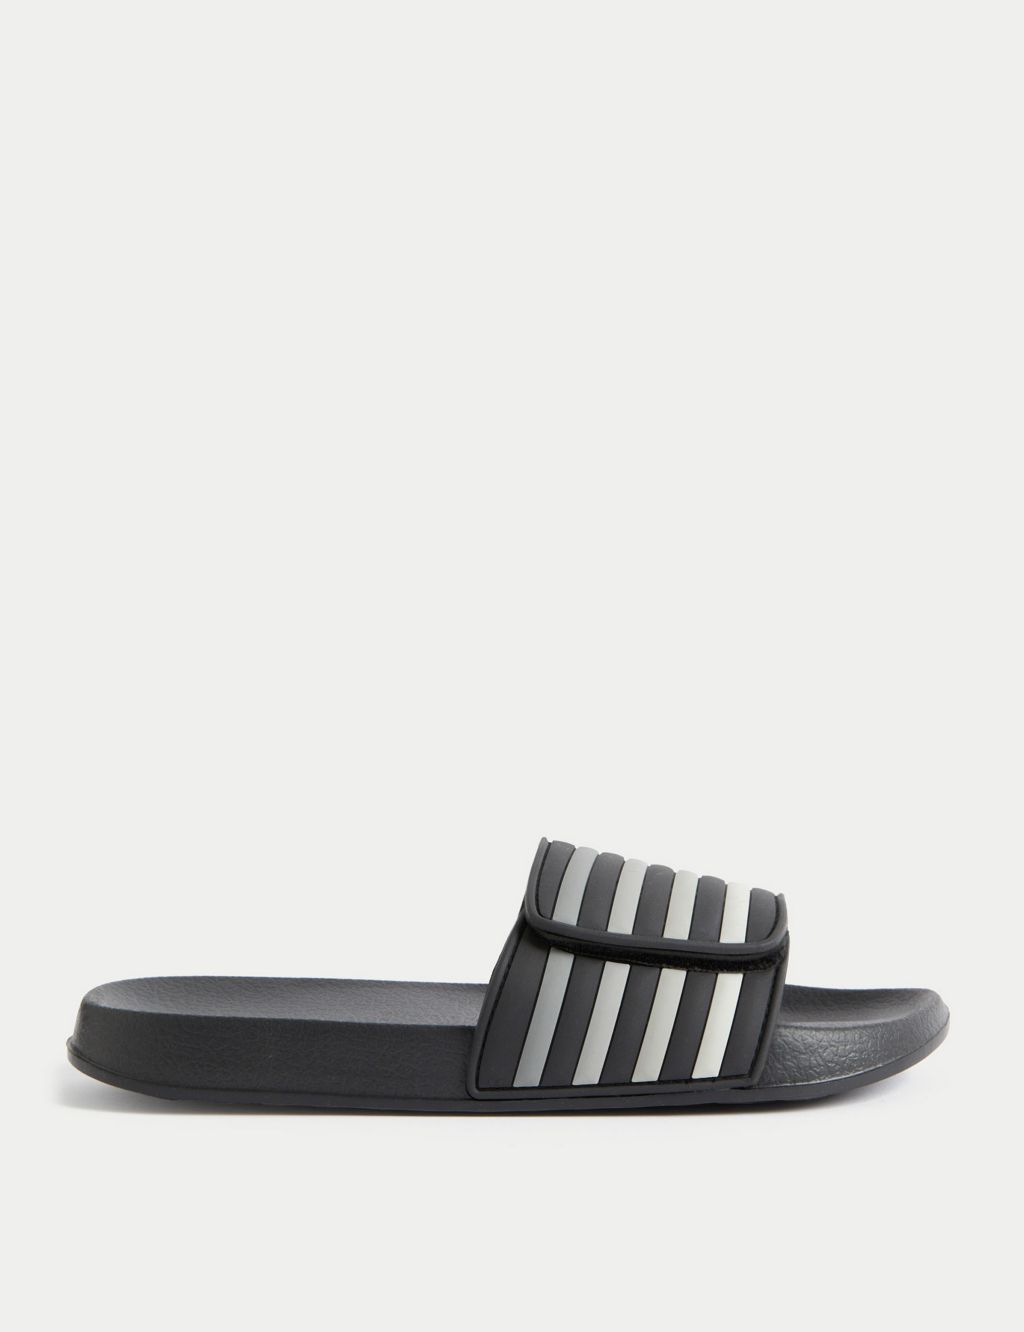 Kids' Striped Sliders (13 Small - 7 Large) image 1